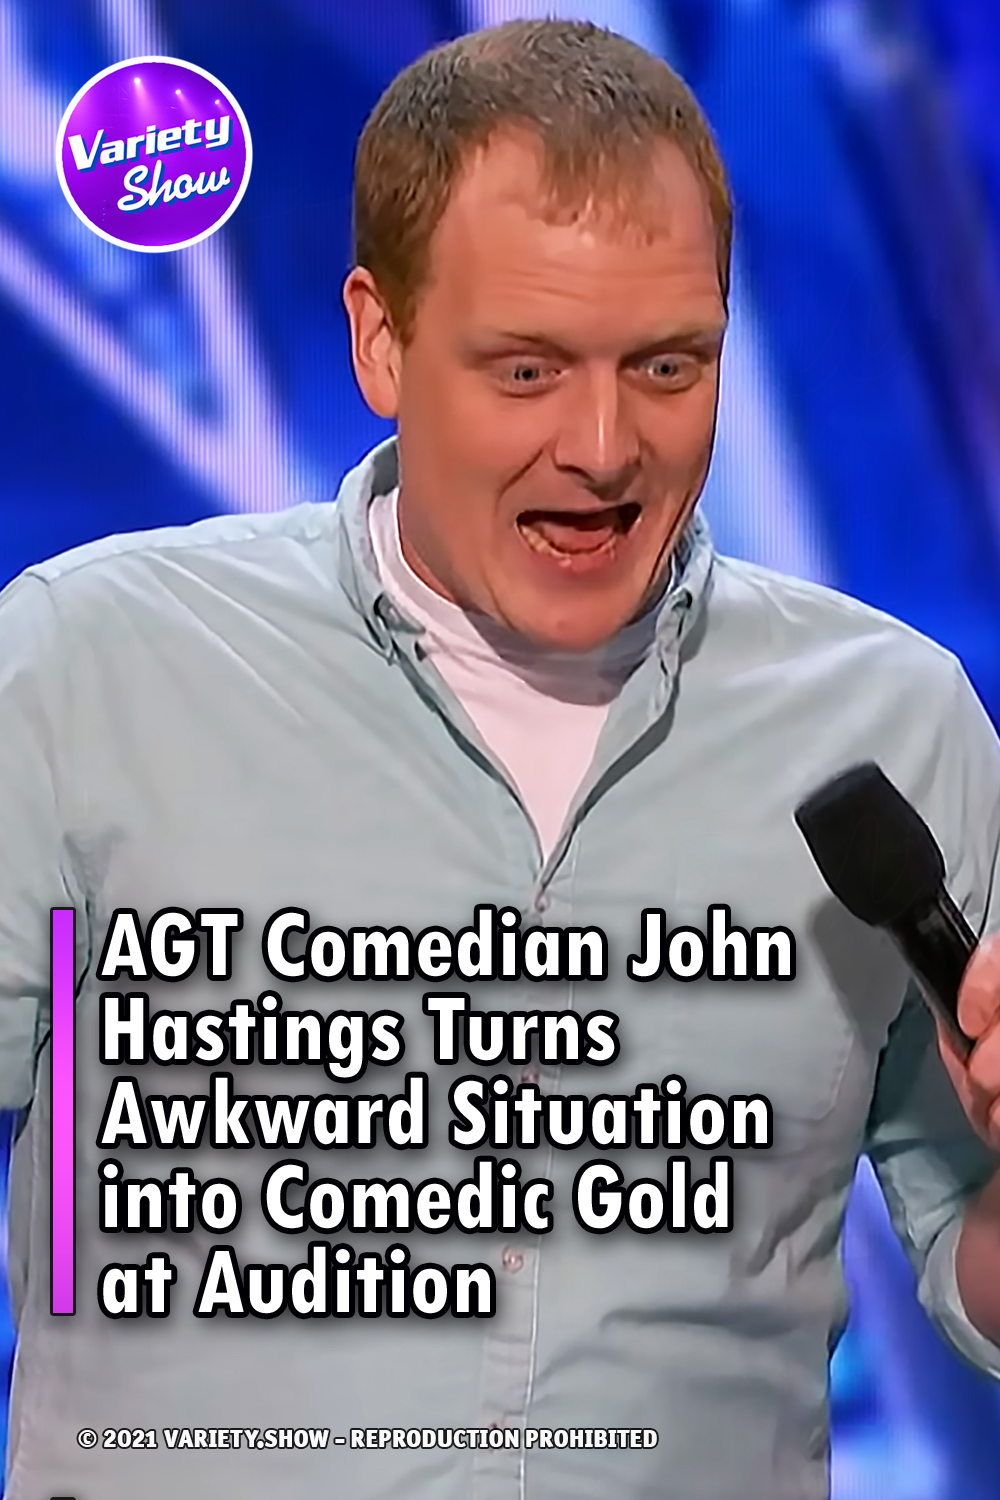 AGT Comedian John Hastings Turns Awkward Situation into Comedic Gold at Audition